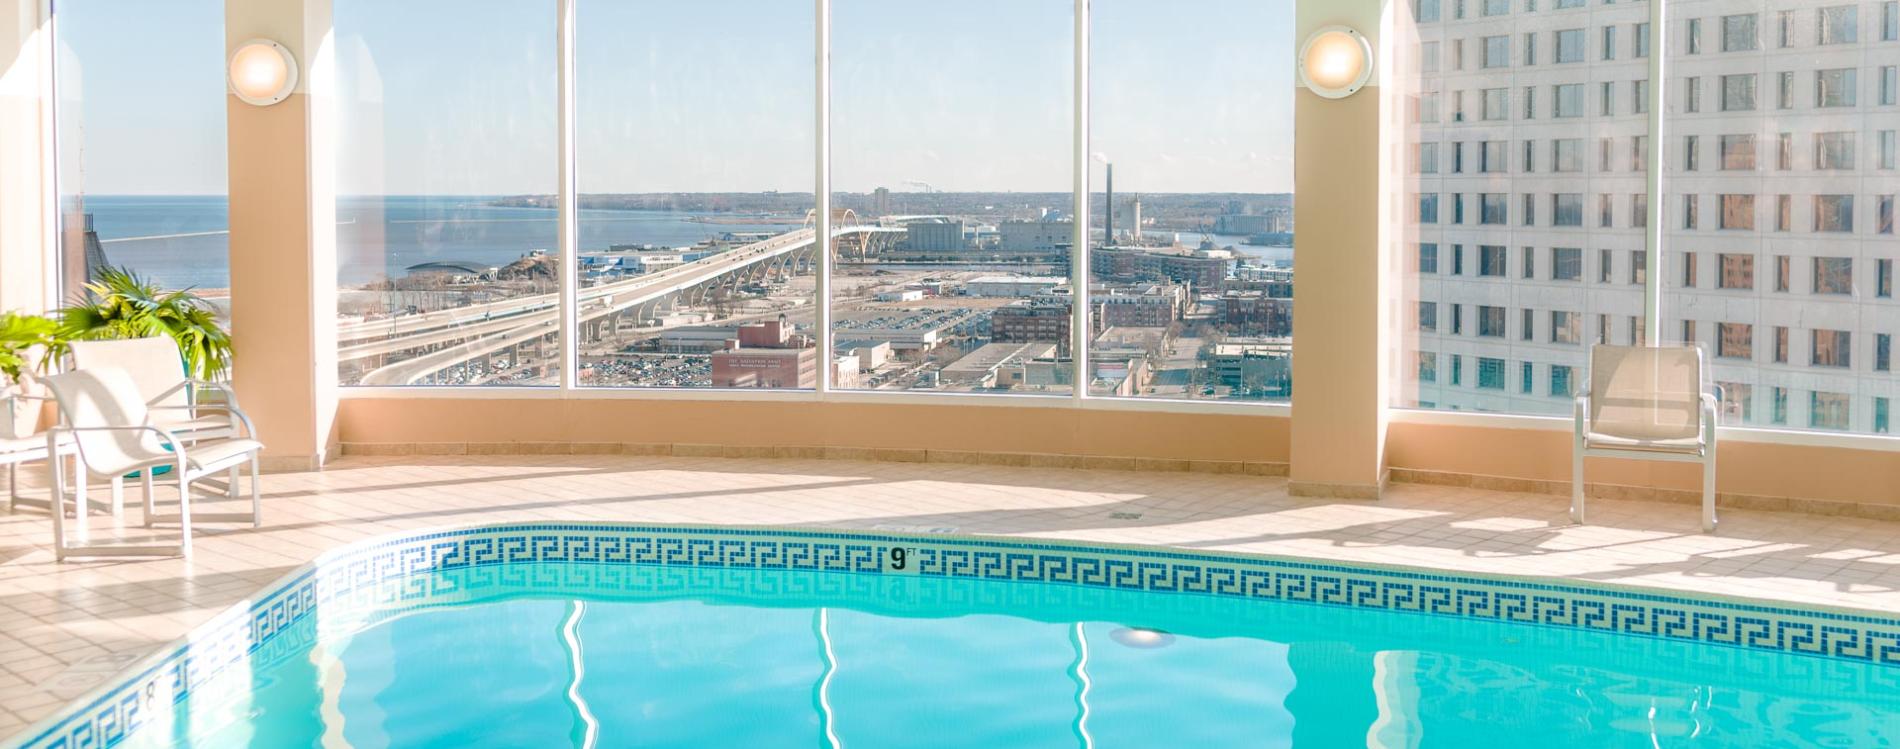 The Pfister Hotel Indoor Pool with view